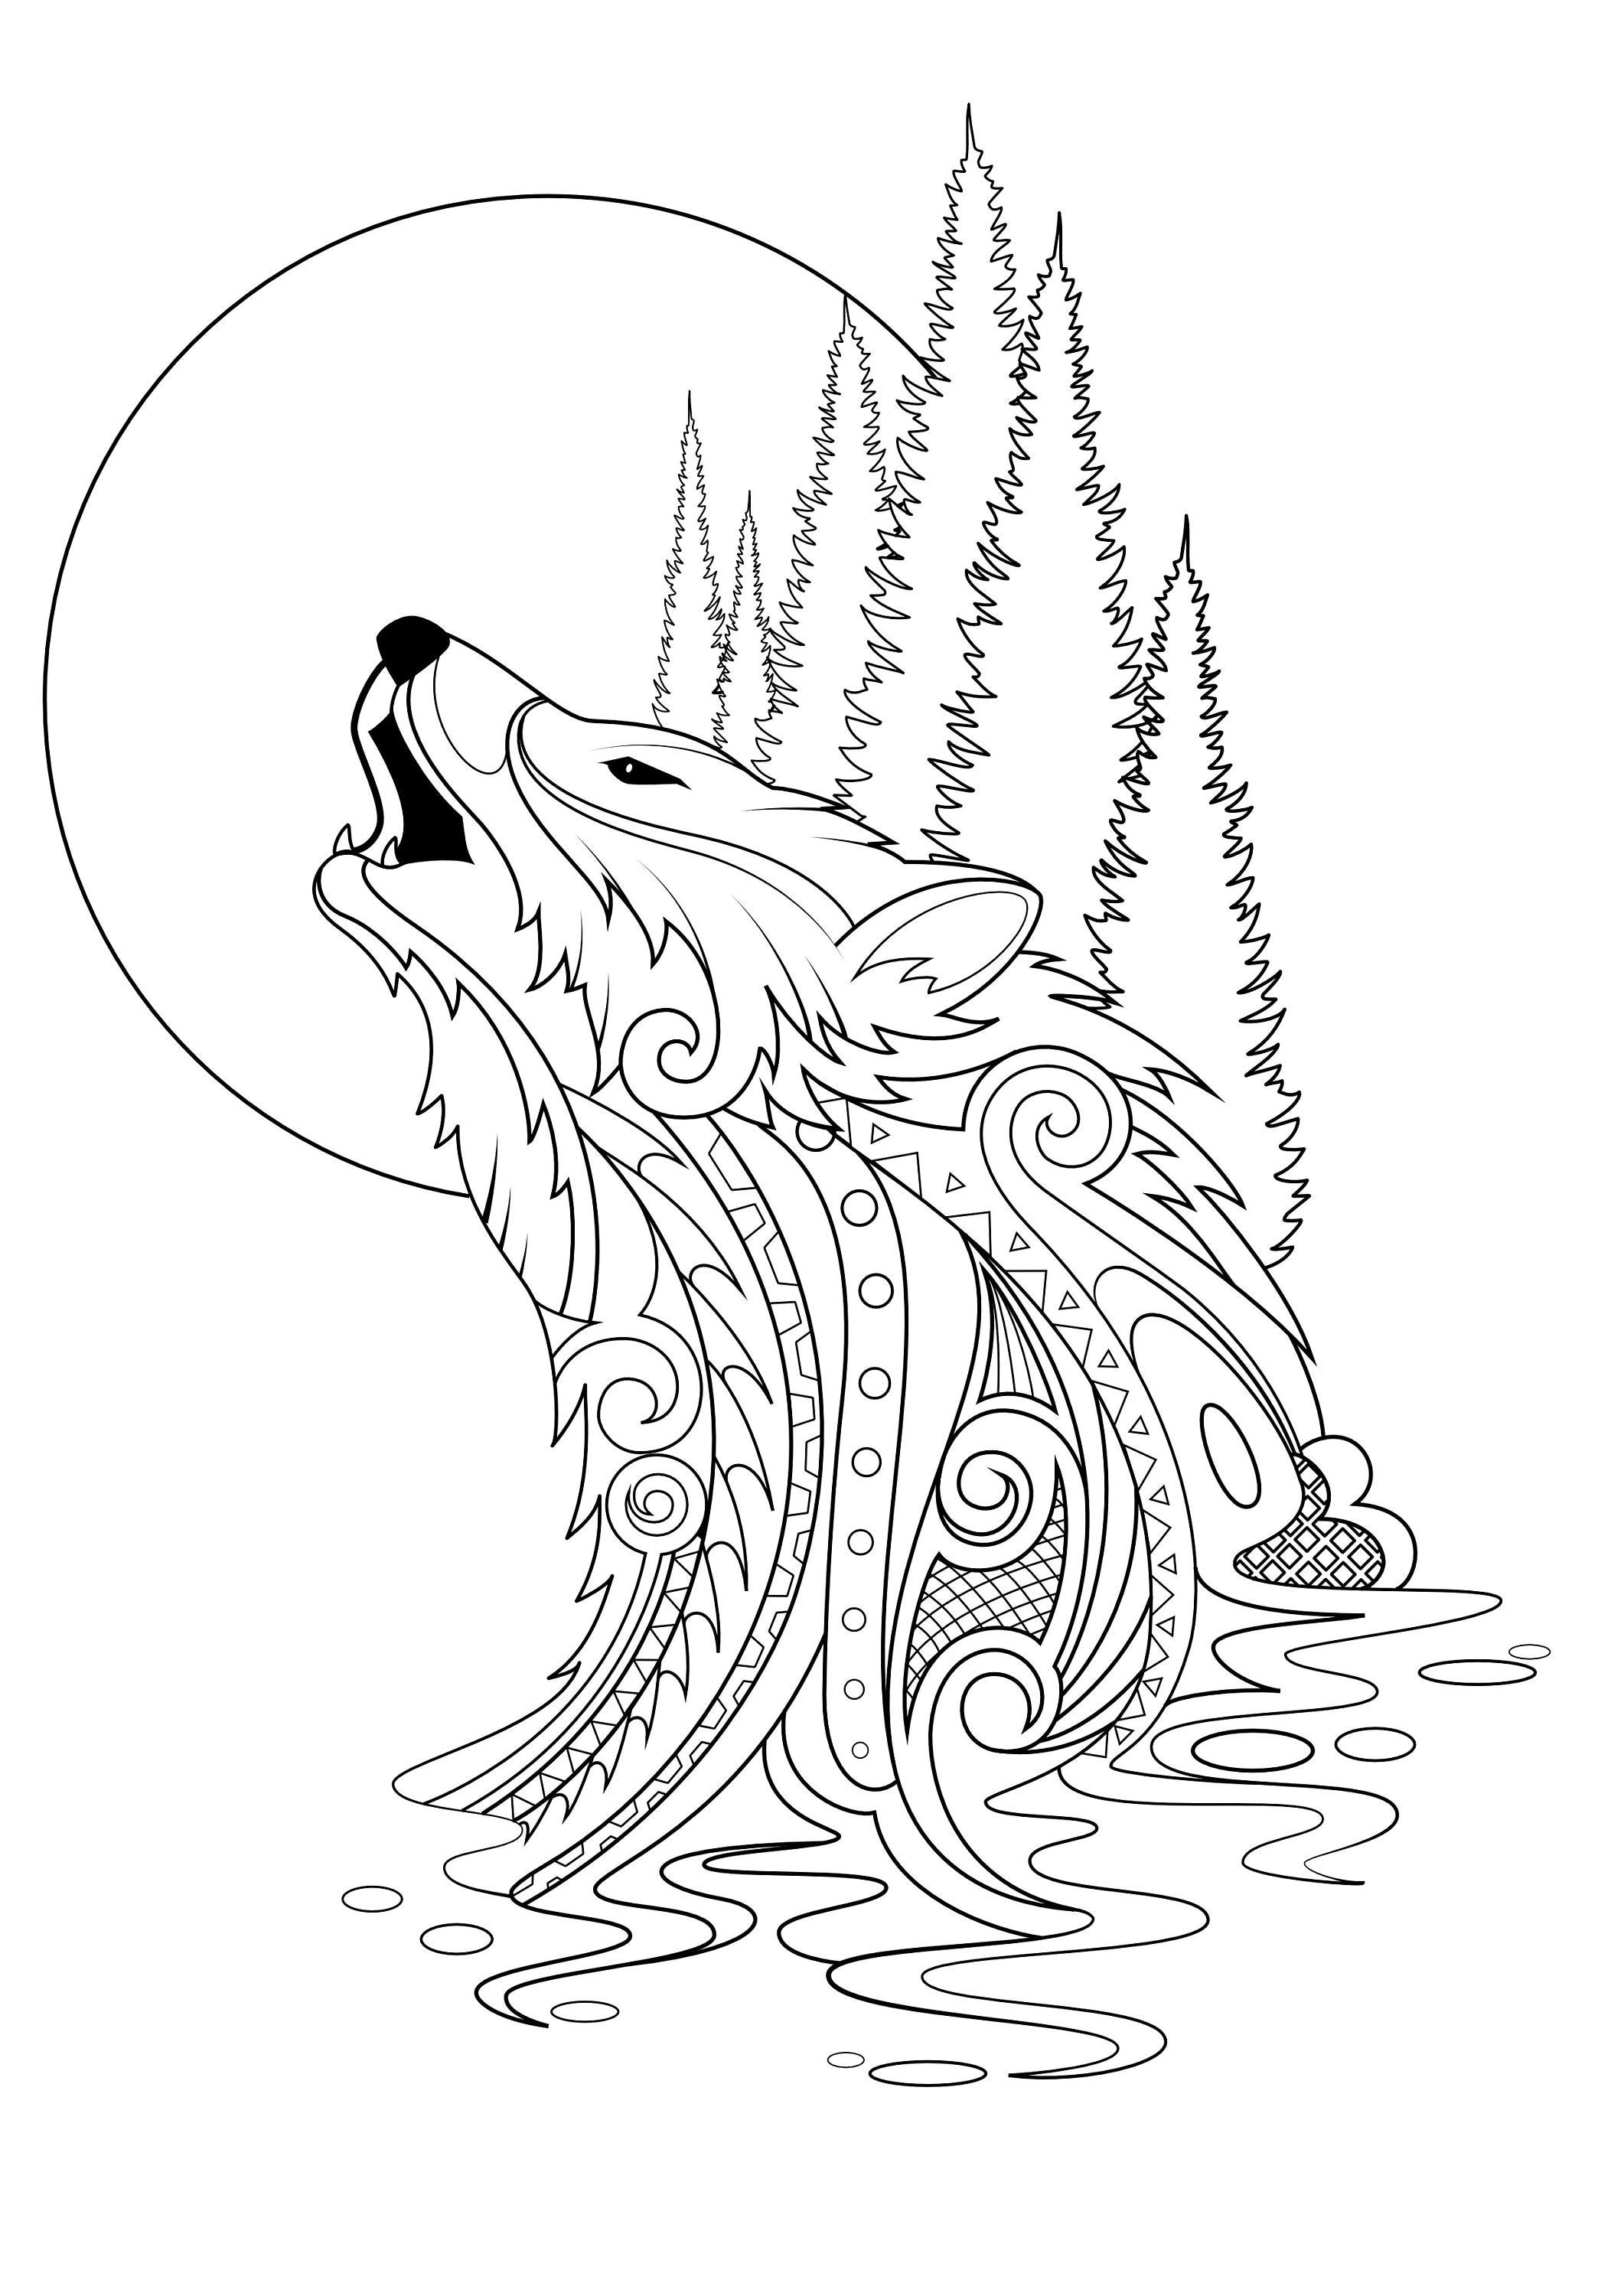 Howling Wolves Coloring Pages